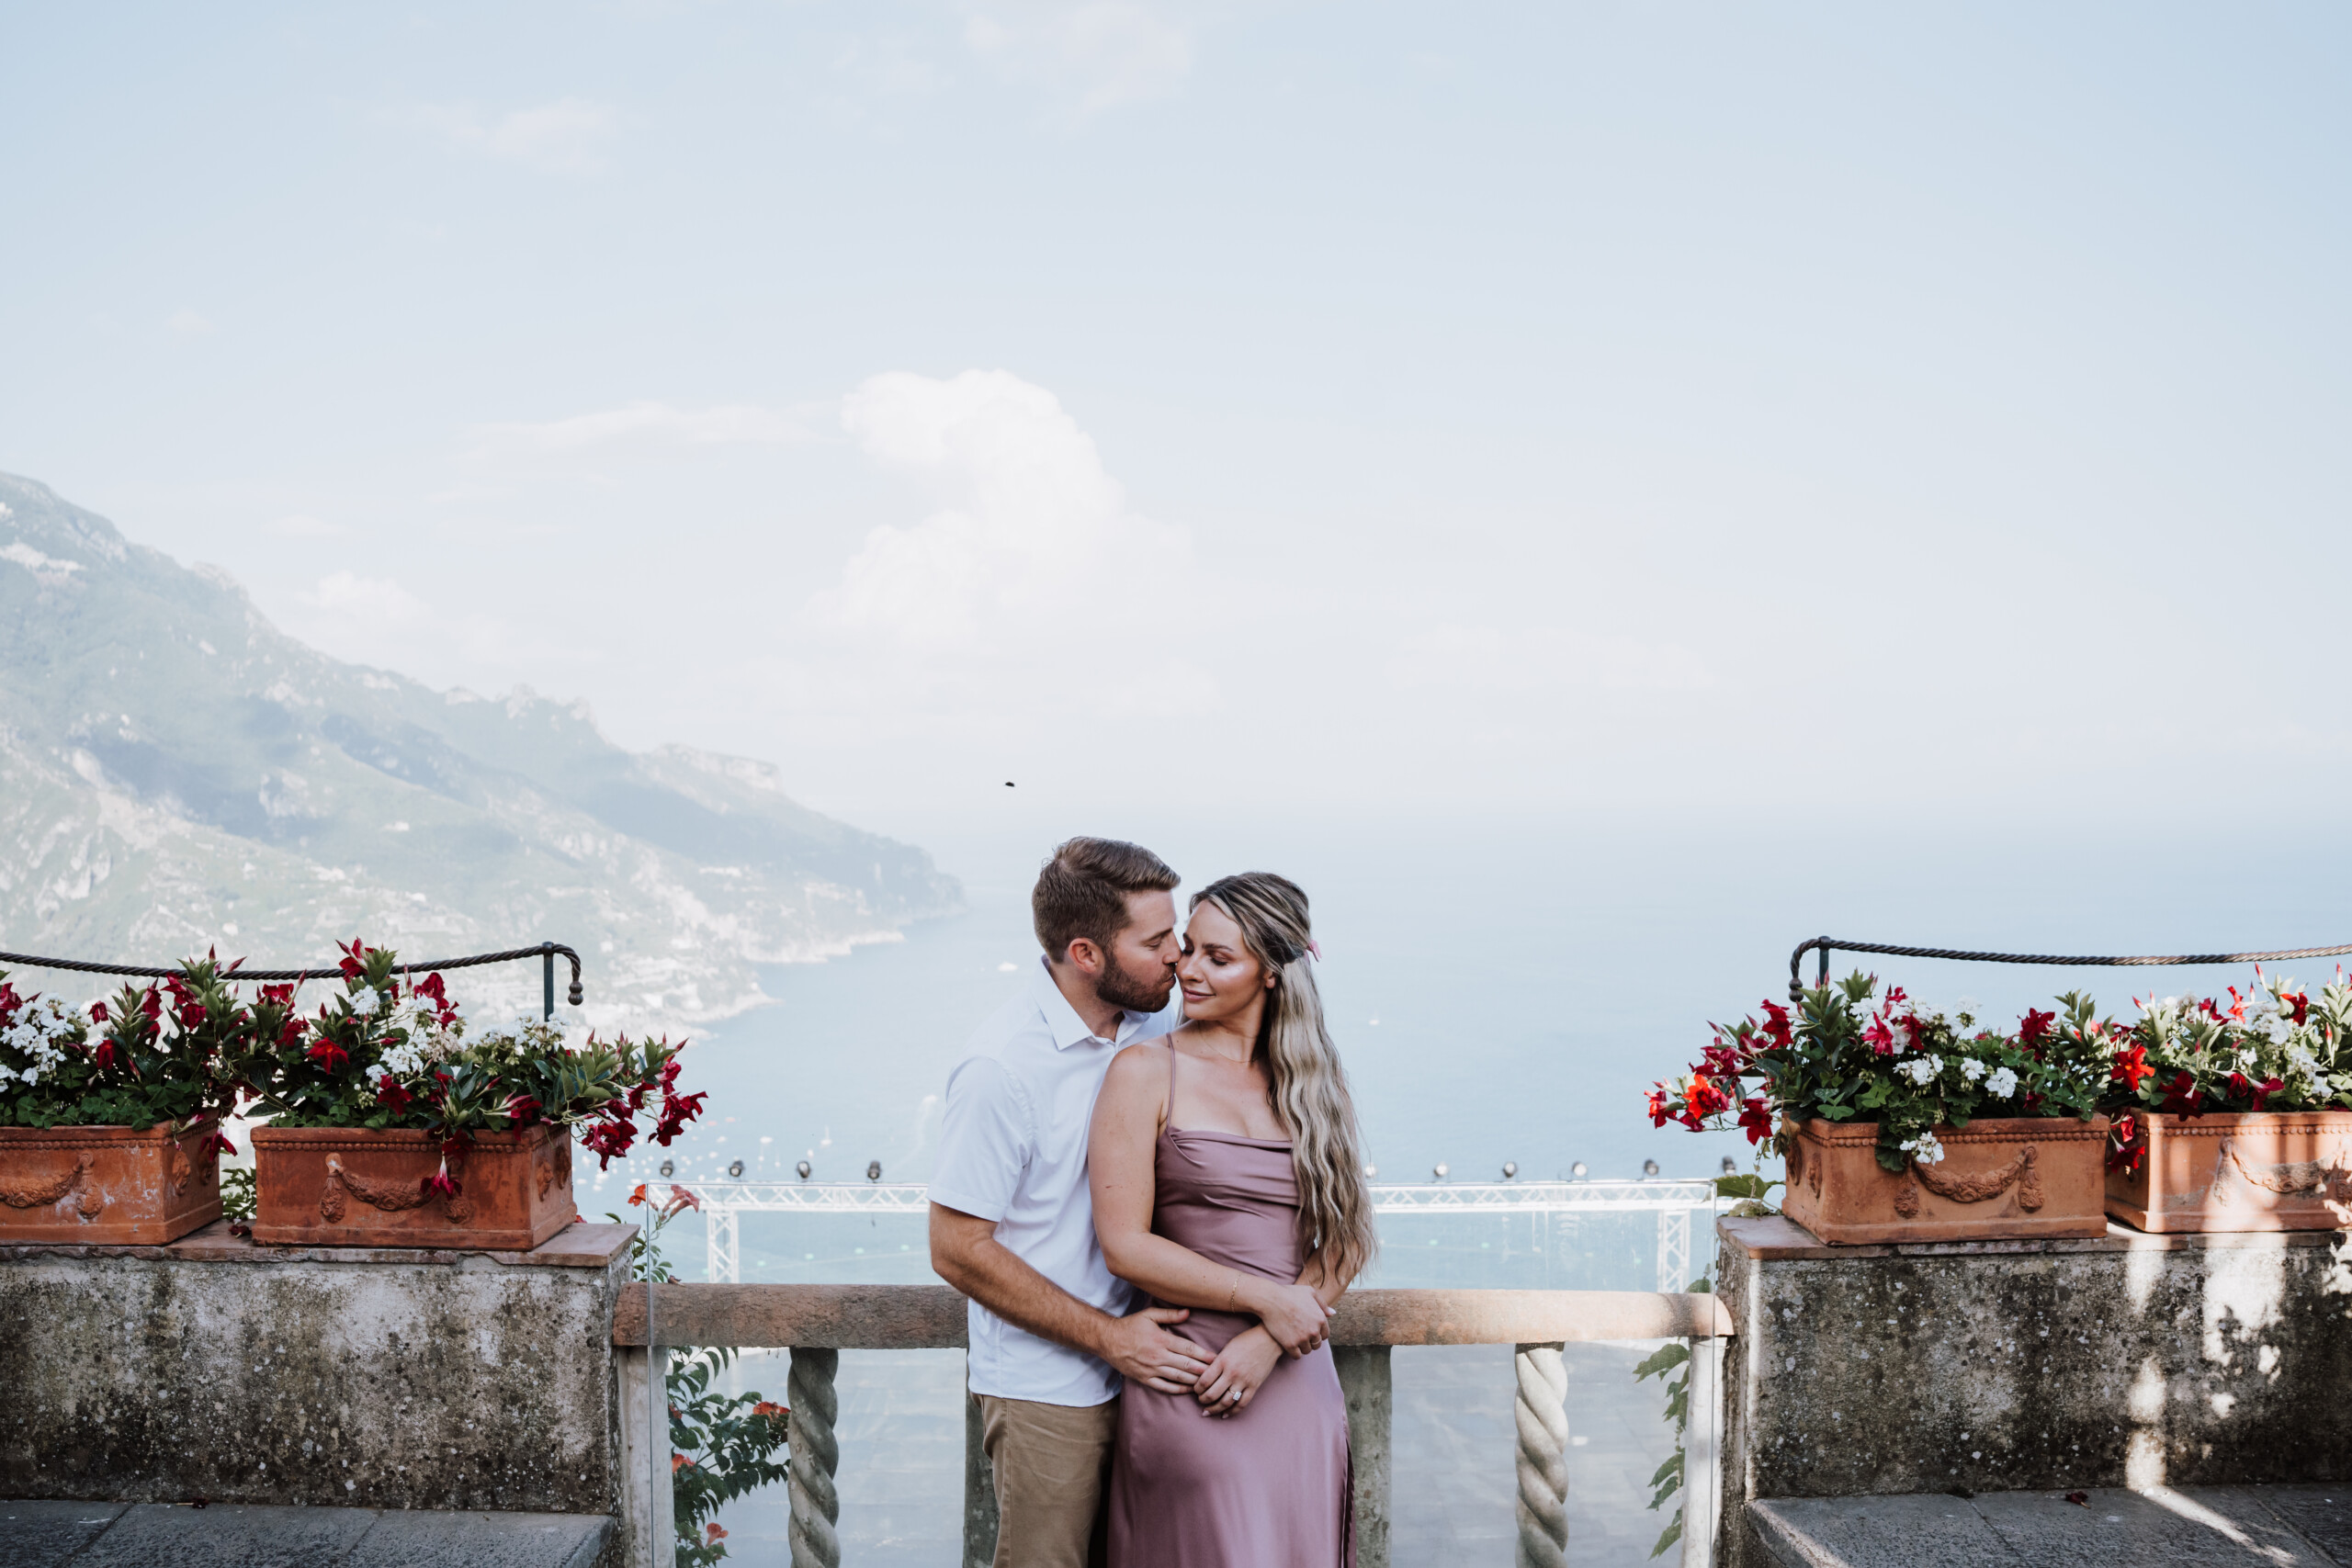 Engagement photoshoot by Mimmo, Localgrapher in Ravello